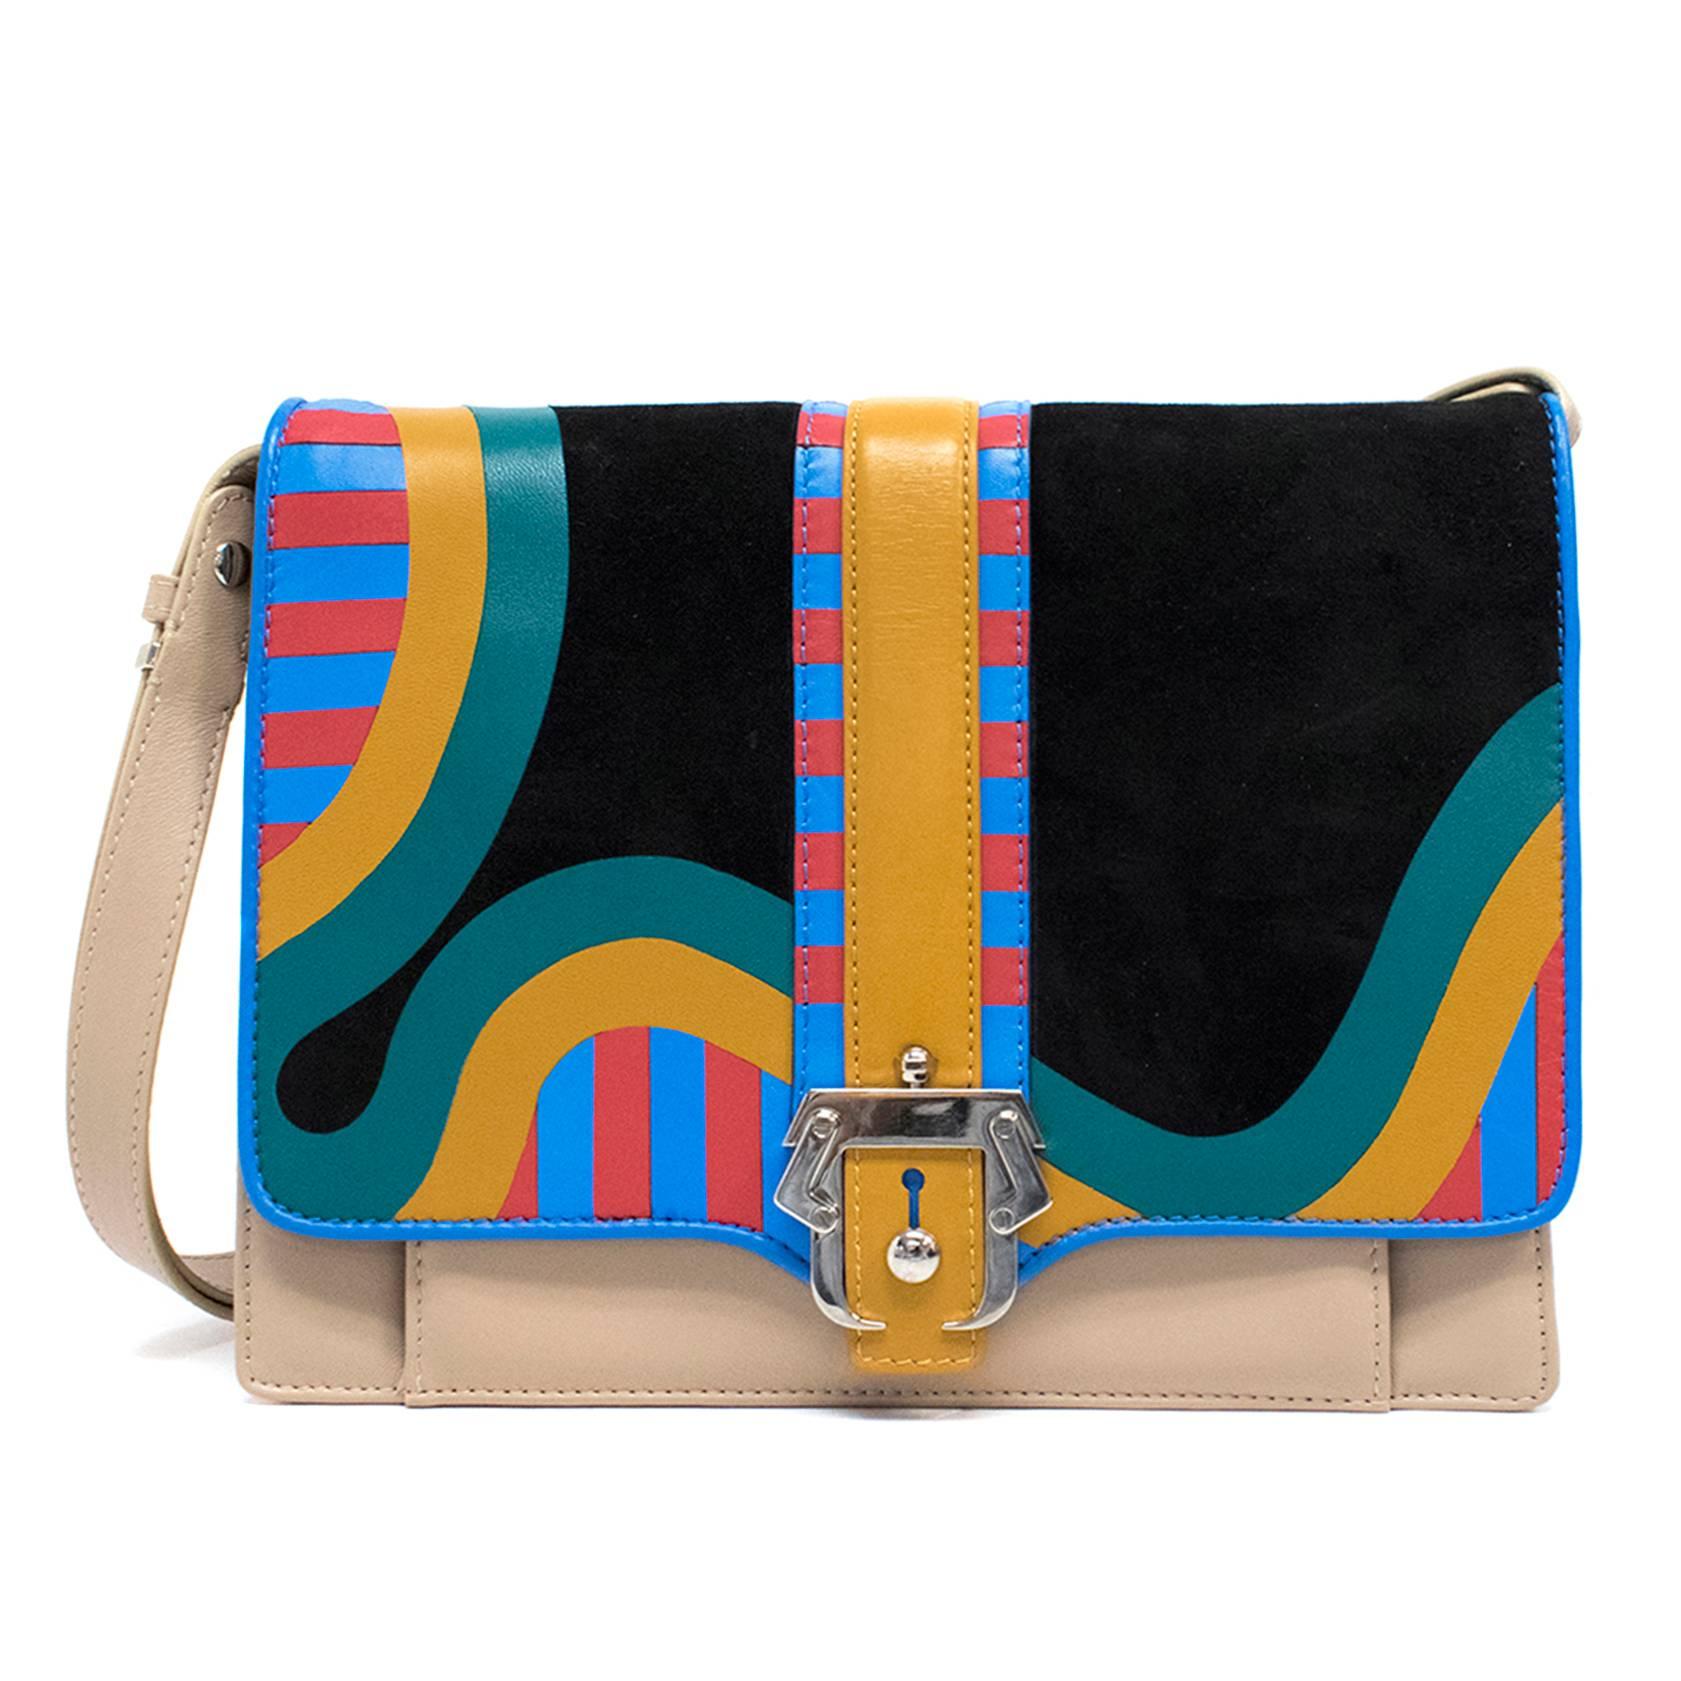 Paula Cademartori multi colour shoulder bag. Features, a nude body and strap, fold over top in patterned tones of blue, red, yellow, green and black suede inserts, Paula Cademartori signature silver toned hard-ware front buckle, magnetic front